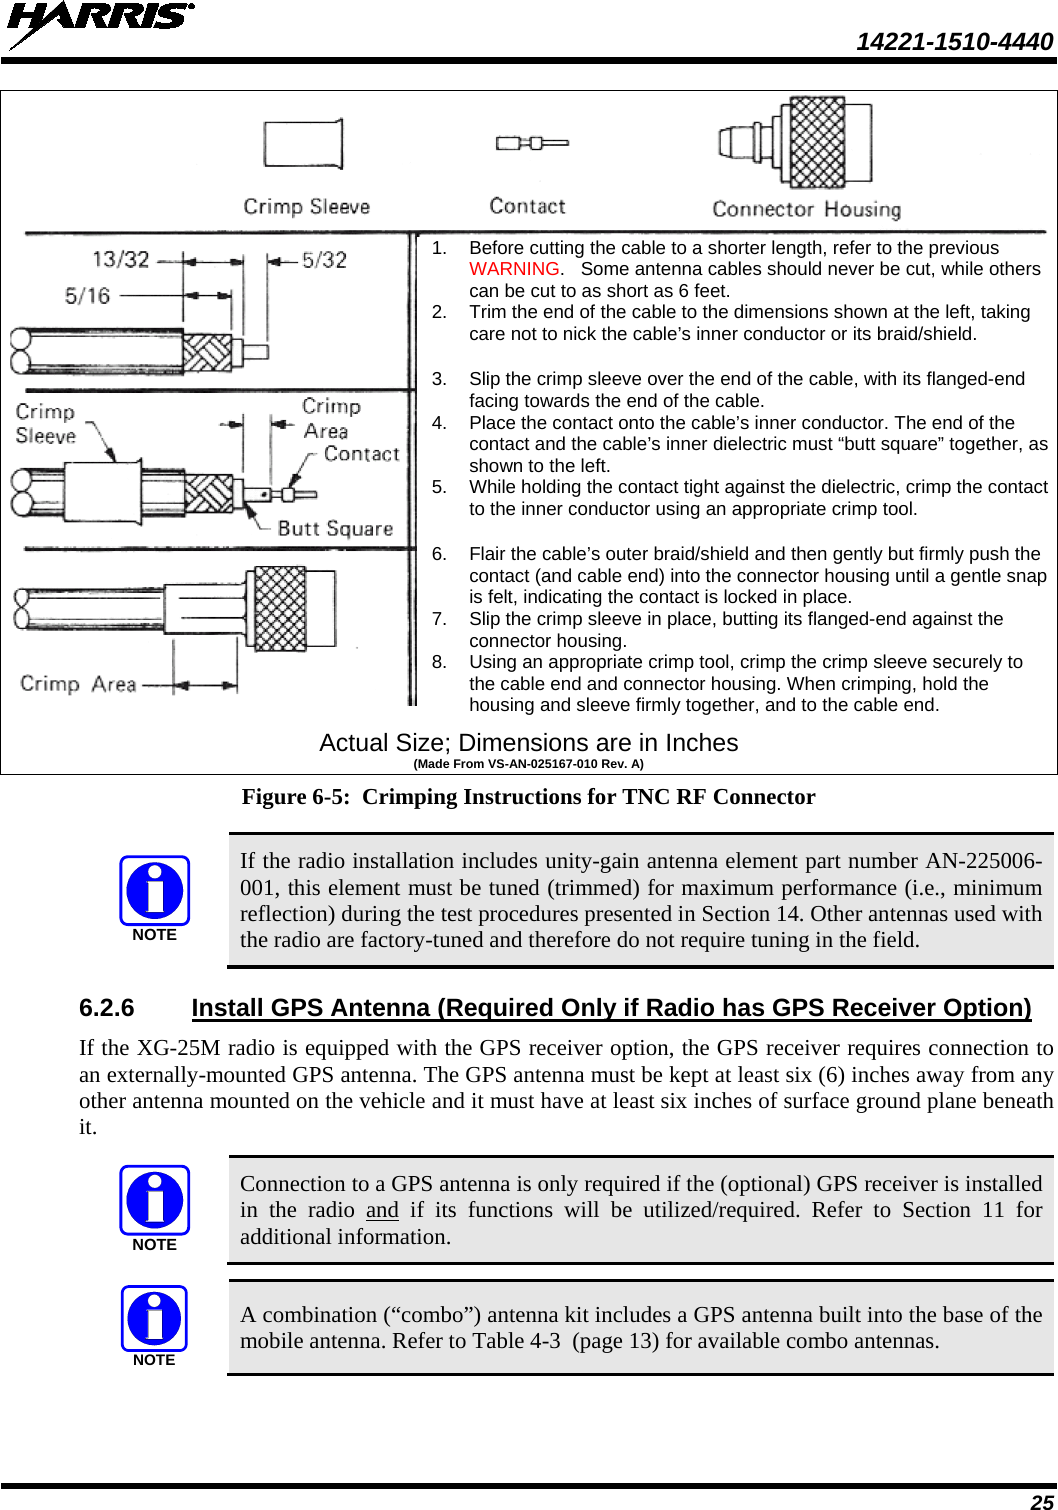  14221-1510-4440 25  Actual Size; Dimensions are in Inches (Made From VS-AN-025167-010 Rev. A) Figure 6-5:  Crimping Instructions for TNC RF Connector   If the radio installation includes unity-gain antenna element part number AN-225006-001, this element must be tuned (trimmed) for maximum performance (i.e., minimum reflection) during the test procedures presented in Section 14. Other antennas used with the radio are factory-tuned and therefore do not require tuning in the field. 6.2.6 Install GPS Antenna (Required Only if Radio has GPS Receiver Option) If the XG-25M radio is equipped with the GPS receiver option, the GPS receiver requires connection to an externally-mounted GPS antenna. The GPS antenna must be kept at least six (6) inches away from any other antenna mounted on the vehicle and it must have at least six inches of surface ground plane beneath it.   Connection to a GPS antenna is only required if the (optional) GPS receiver is installed in the radio and if its functions will be utilized/required. Refer to Section 11 for additional information.   A combination (“combo”) antenna kit includes a GPS antenna built into the base of the mobile antenna. Refer to Table 4-3  (page 13) for available combo antennas. NOTENOTENOTE1. Before cutting the cable to a shorter length, refer to the previous WARNING.   Some antenna cables should never be cut, while others can be cut to as short as 6 feet. 2. Trim the end of the cable to the dimensions shown at the left, taking care not to nick the cable’s inner conductor or its braid/shield.  3. Slip the crimp sleeve over the end of the cable, with its flanged-end facing towards the end of the cable. 4. Place the contact onto the cable’s inner conductor. The end of the contact and the cable’s inner dielectric must “butt square” together, as shown to the left. 5. While holding the contact tight against the dielectric, crimp the contact to the inner conductor using an appropriate crimp tool.  6. Flair the cable’s outer braid/shield and then gently but firmly push the contact (and cable end) into the connector housing until a gentle snap is felt, indicating the contact is locked in place. 7. Slip the crimp sleeve in place, butting its flanged-end against the connector housing. 8. Using an appropriate crimp tool, crimp the crimp sleeve securely to the cable end and connector housing. When crimping, hold the housing and sleeve firmly together, and to the cable end. 